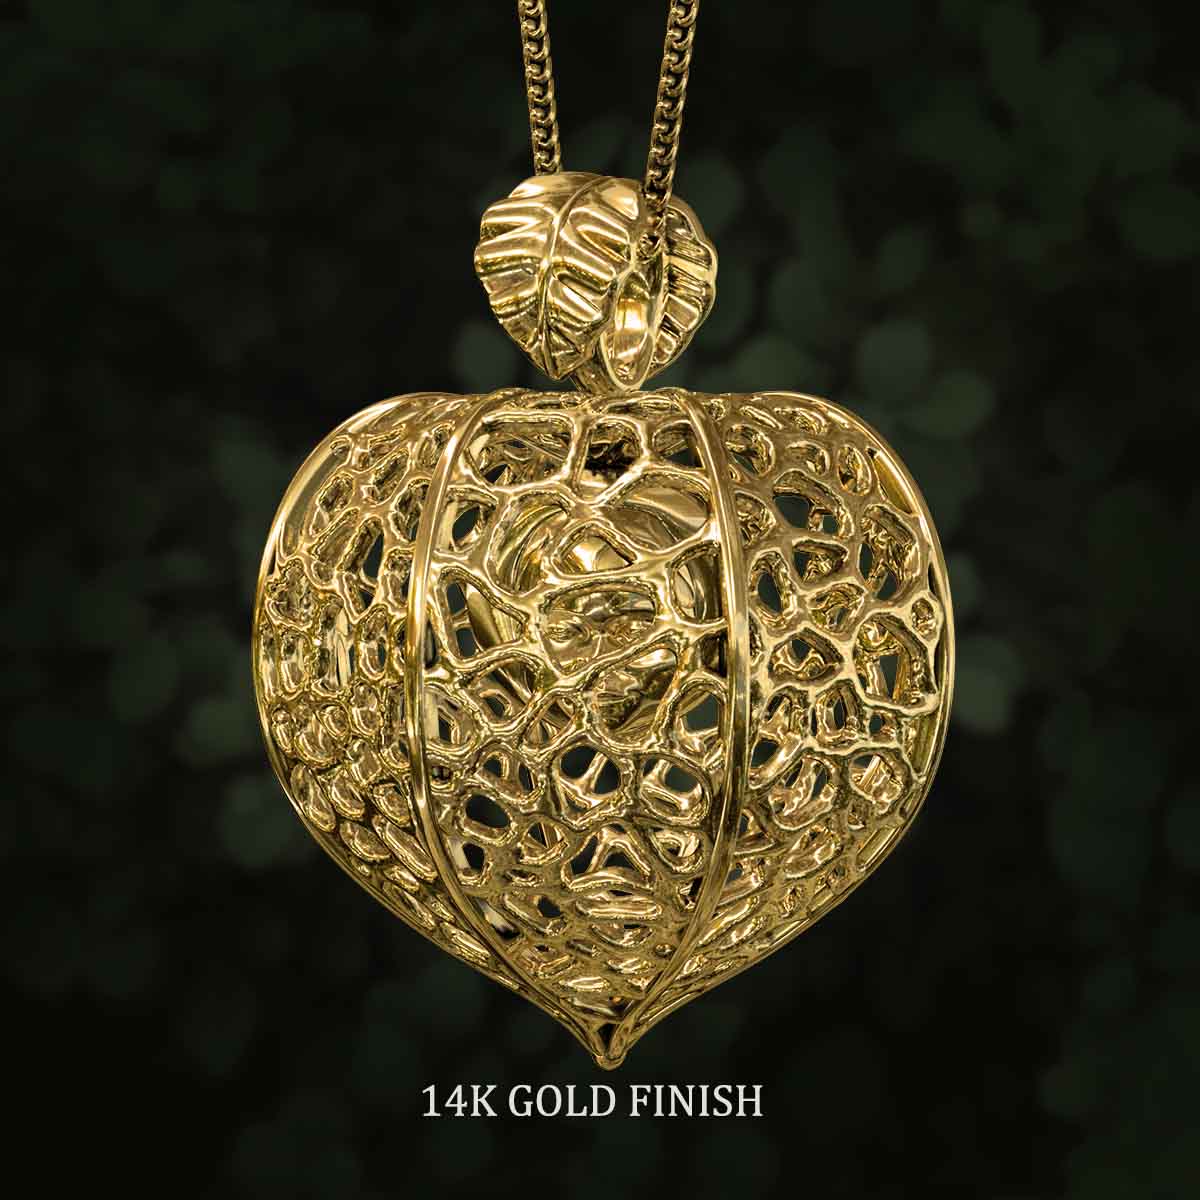 14k-Gold-Finish-Chinese-Lantern-Plant-With-a-Cute-Face-Inside-the-Seed-Pendant-Jewelry-For-Necklace